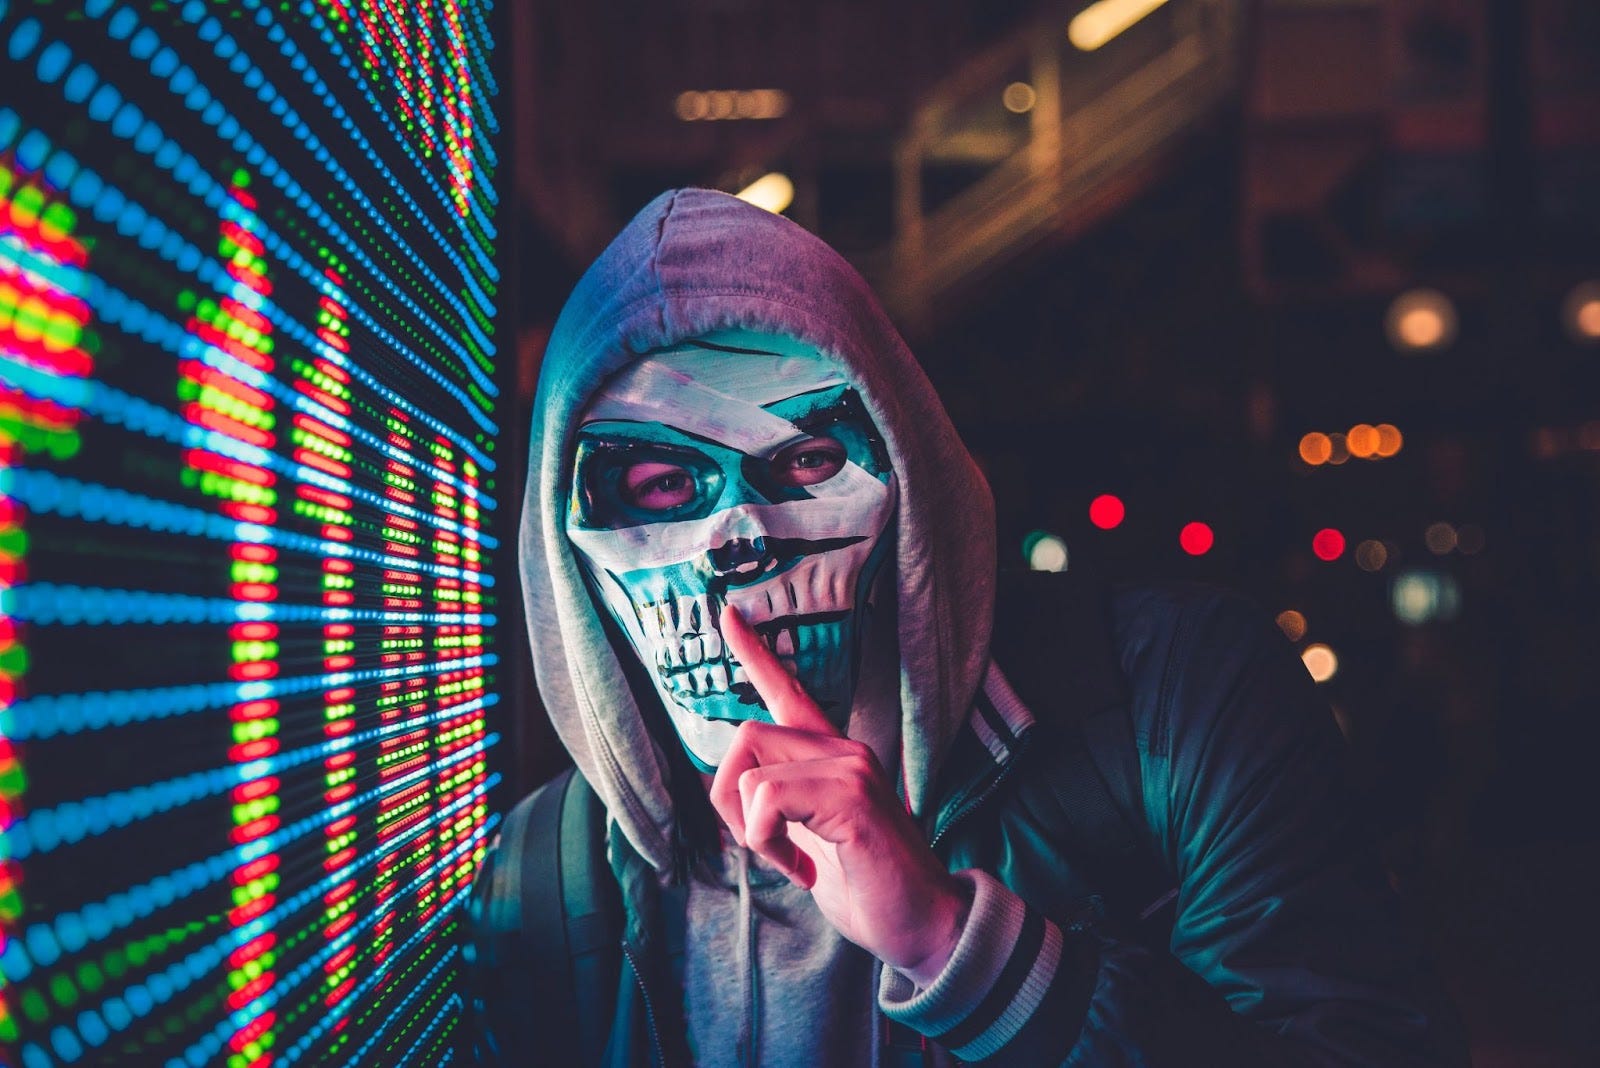 Photo of a man wearing a skull mask and a hoodie next to a digital display with a finger to his lips signaling “be quiet.”